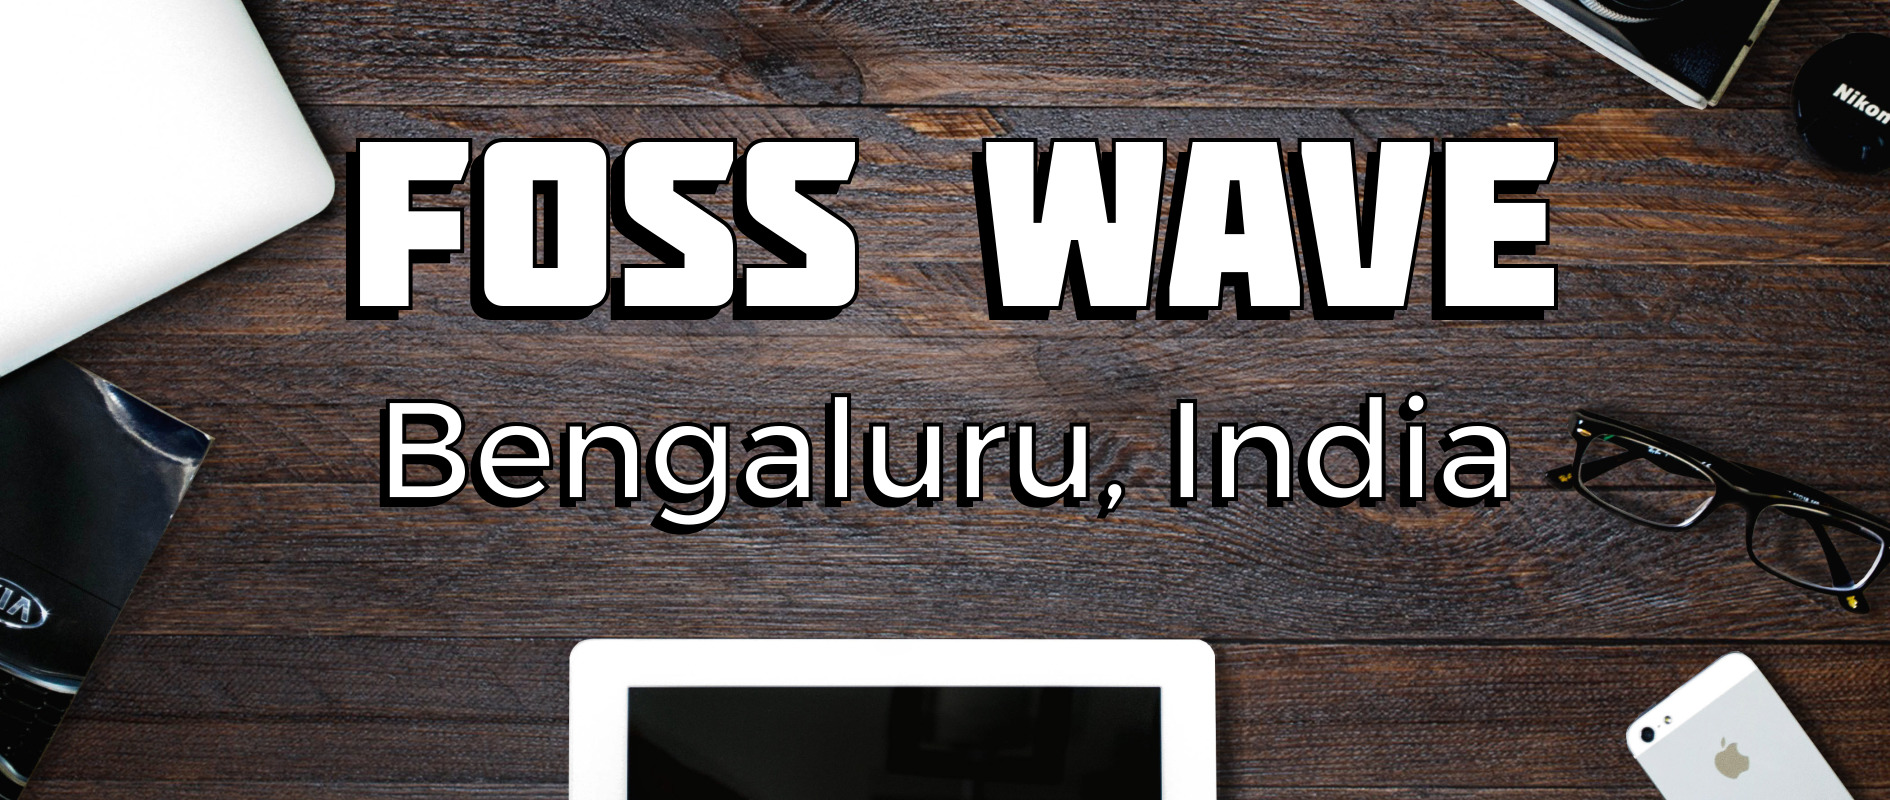 FOSS Wave: CMR Institute of Technology in Bengaluru, India